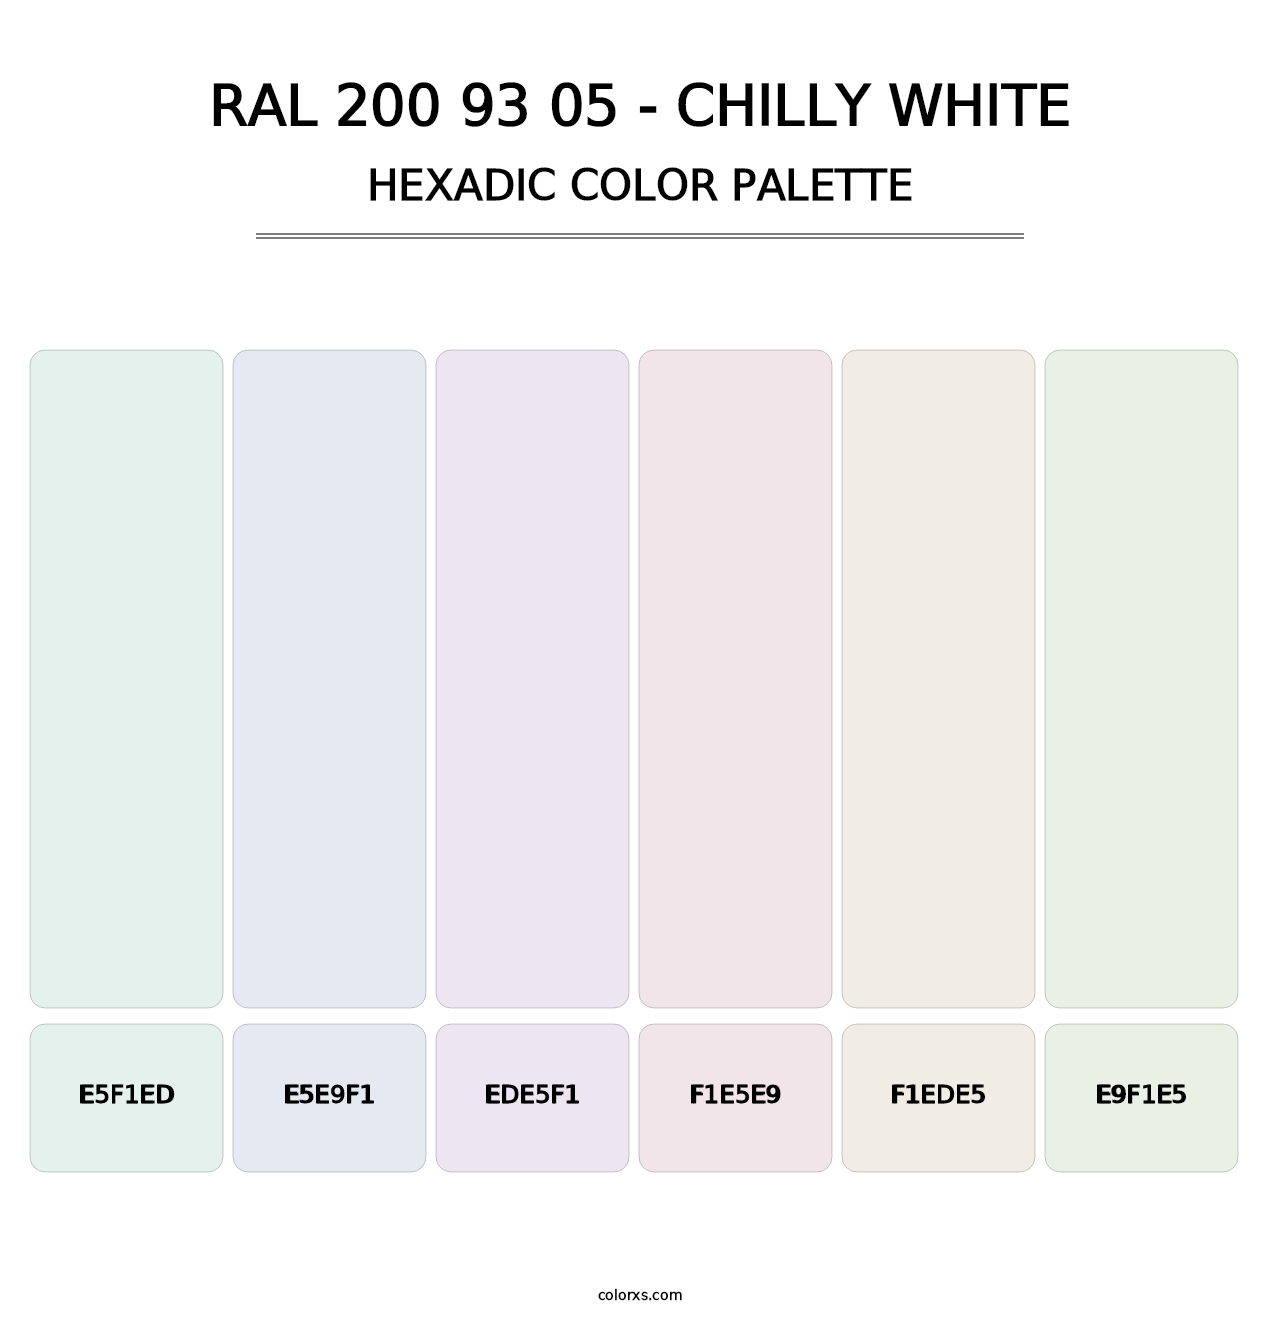 RAL 200 93 05 - Chilly White - Hexadic Color Palette